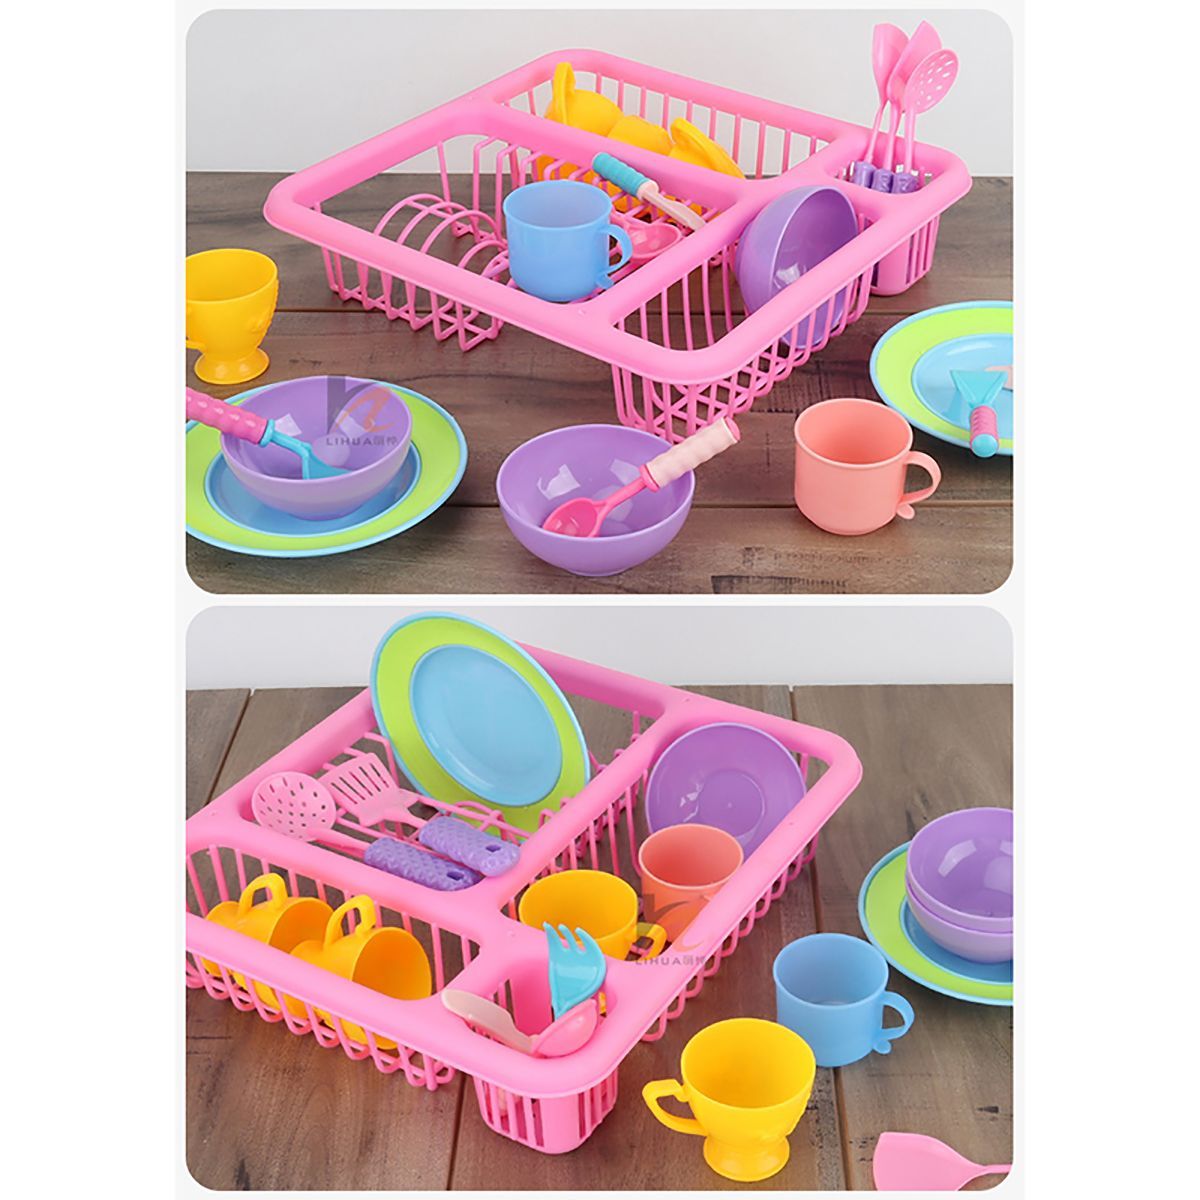 21PCS-Kids-Pretend-Play-Dishes-Kitchen-Playset-Wash-amp-Dry-Tableware-Rack-Toys-1629829